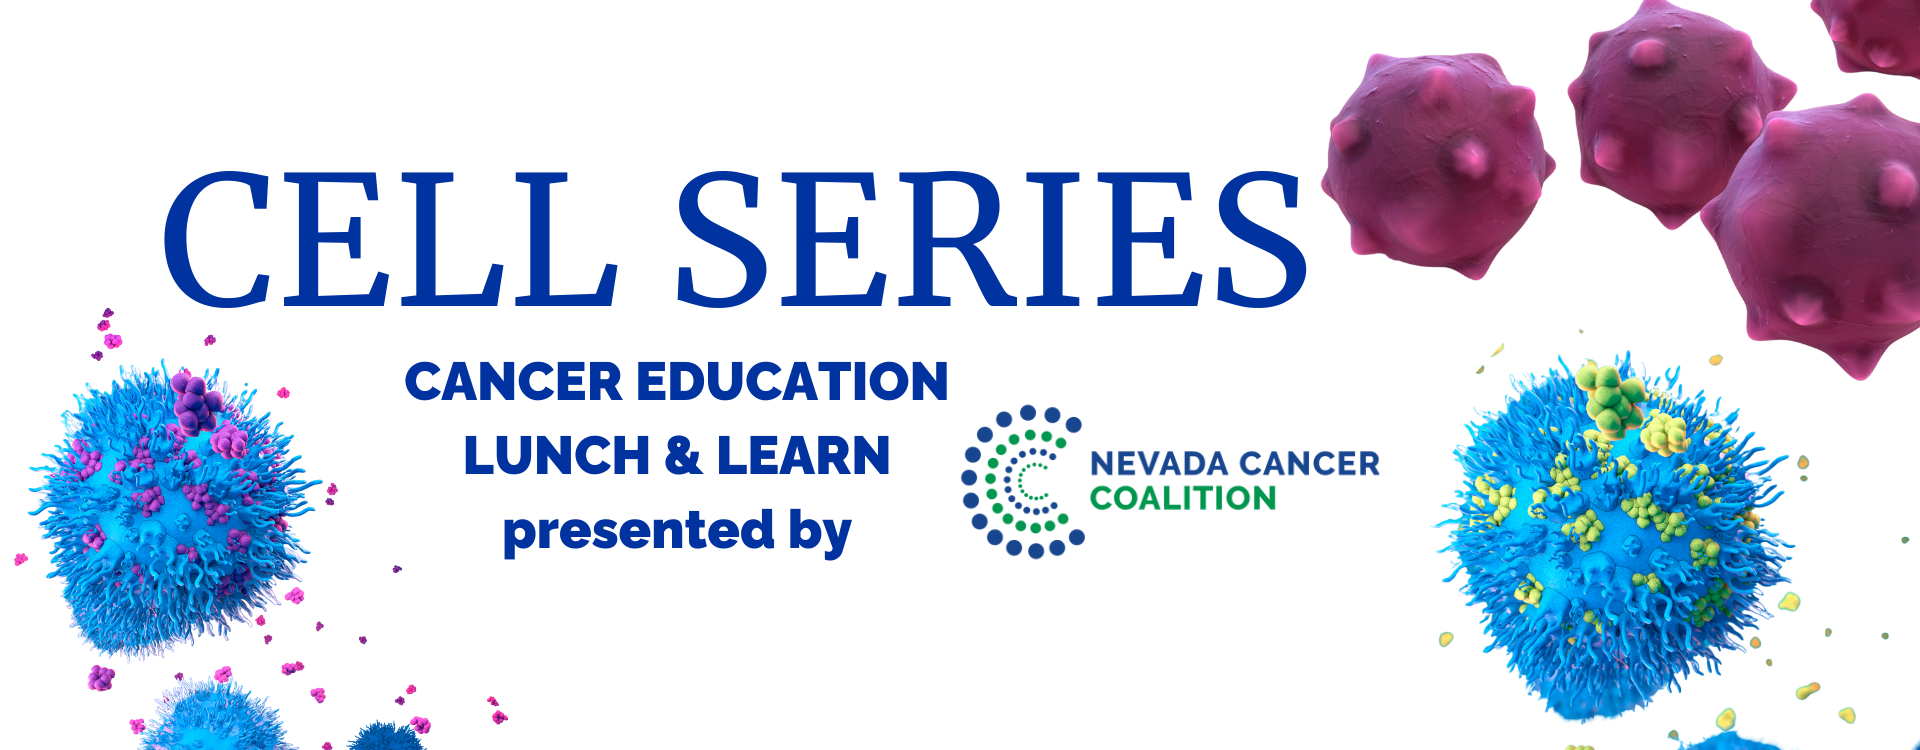 CELL Series Cancer Education Lunch & Learn presented by Nevada Cancer Coalition